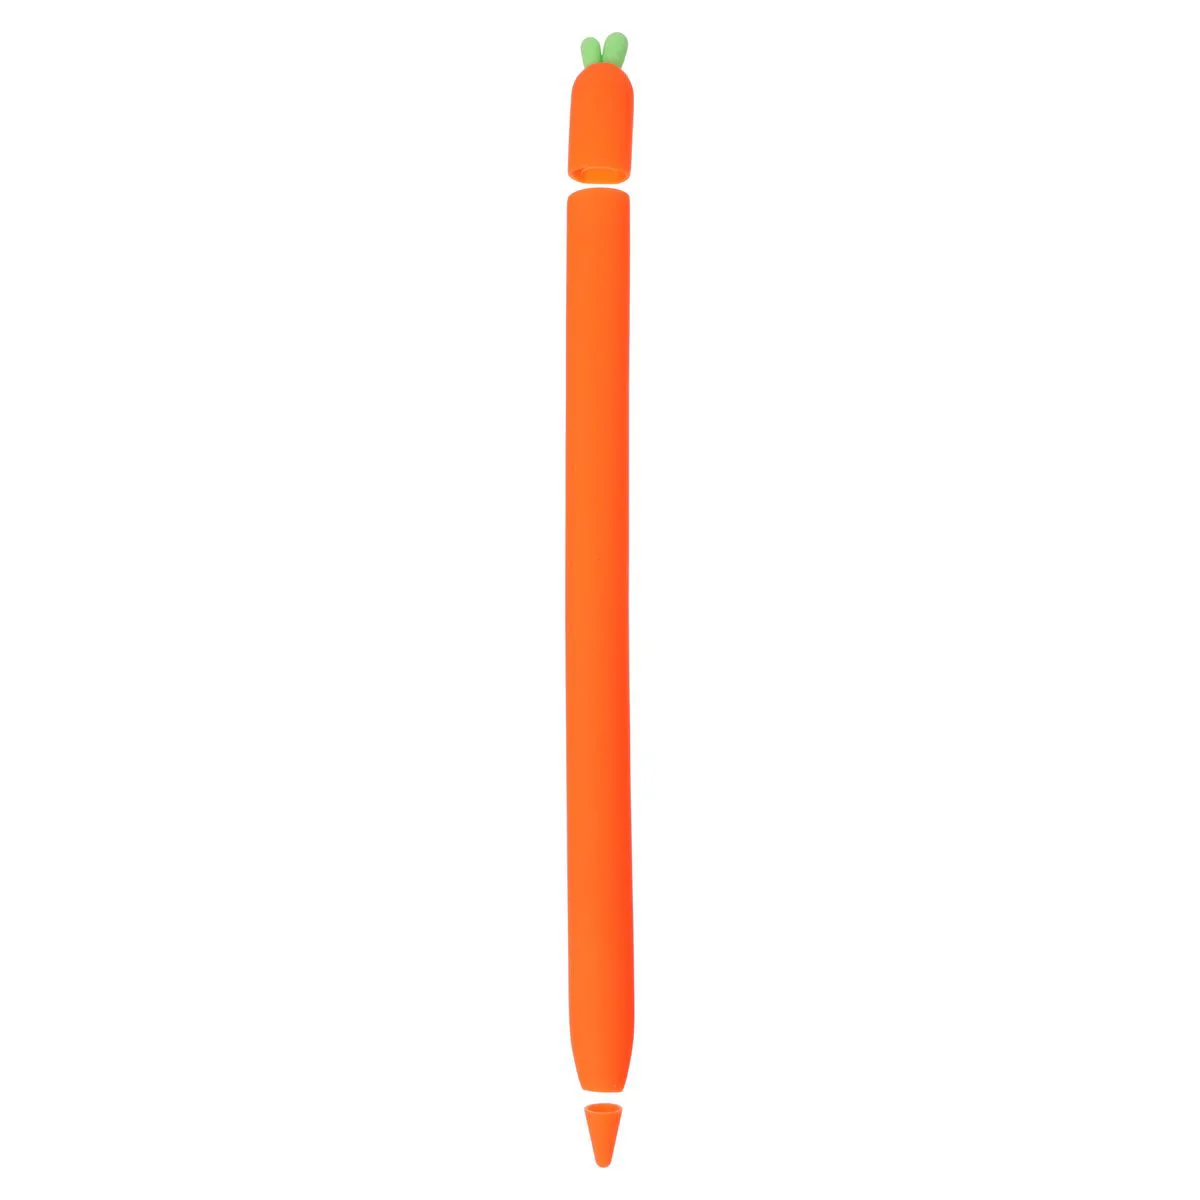 

Stylus Case Pen Silicone Carrot Cover Sleeve No Noise Anti-slip Silica Gel